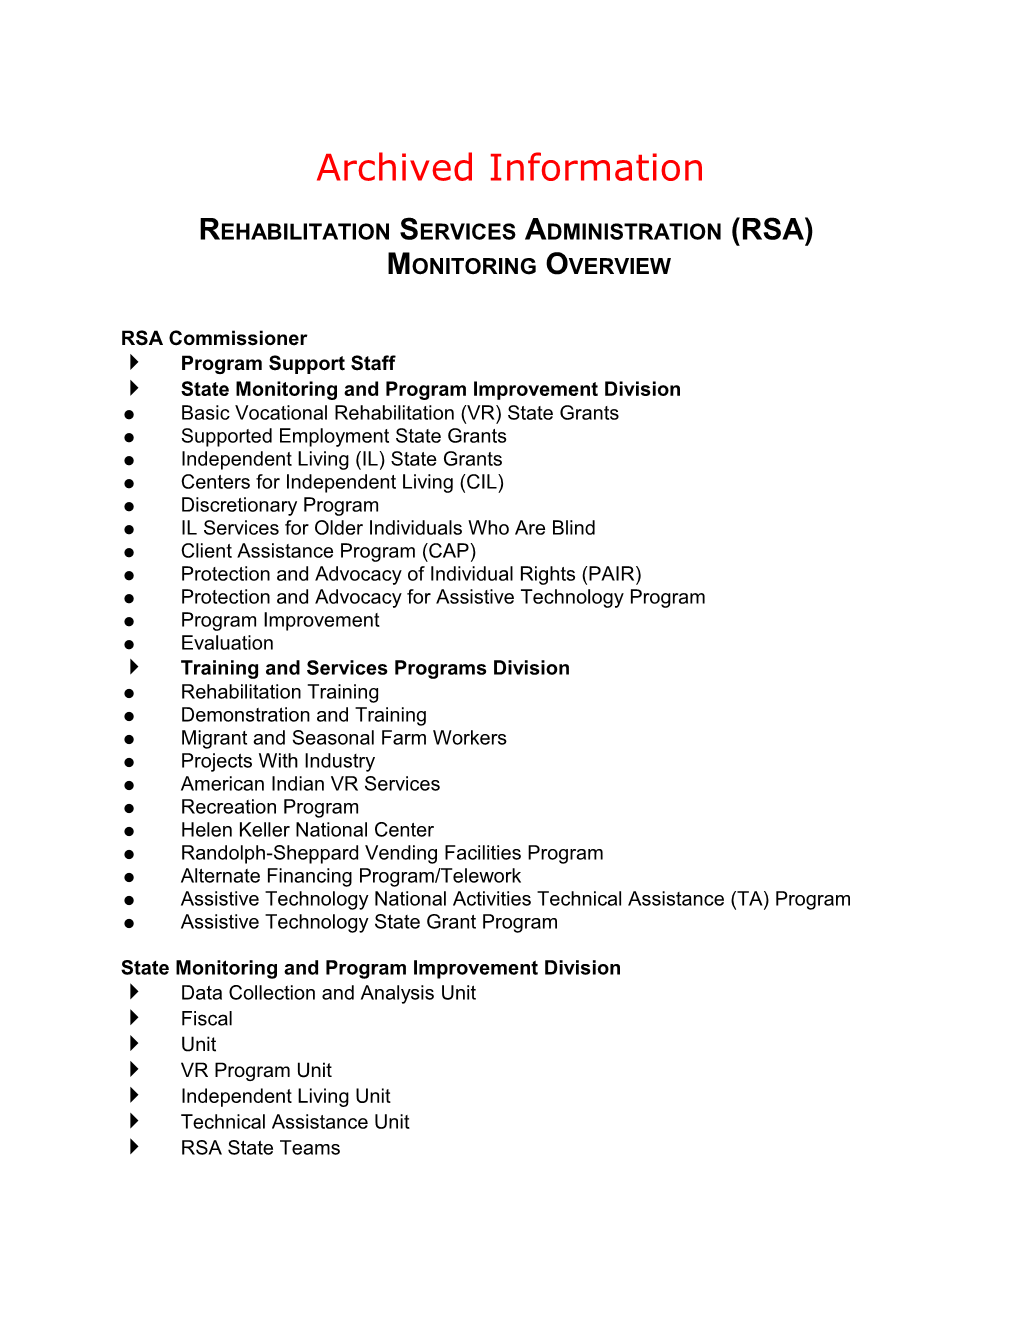 Archived: Rehabilitation Services Administration (RSA) Monitoring Overview (MS Word)